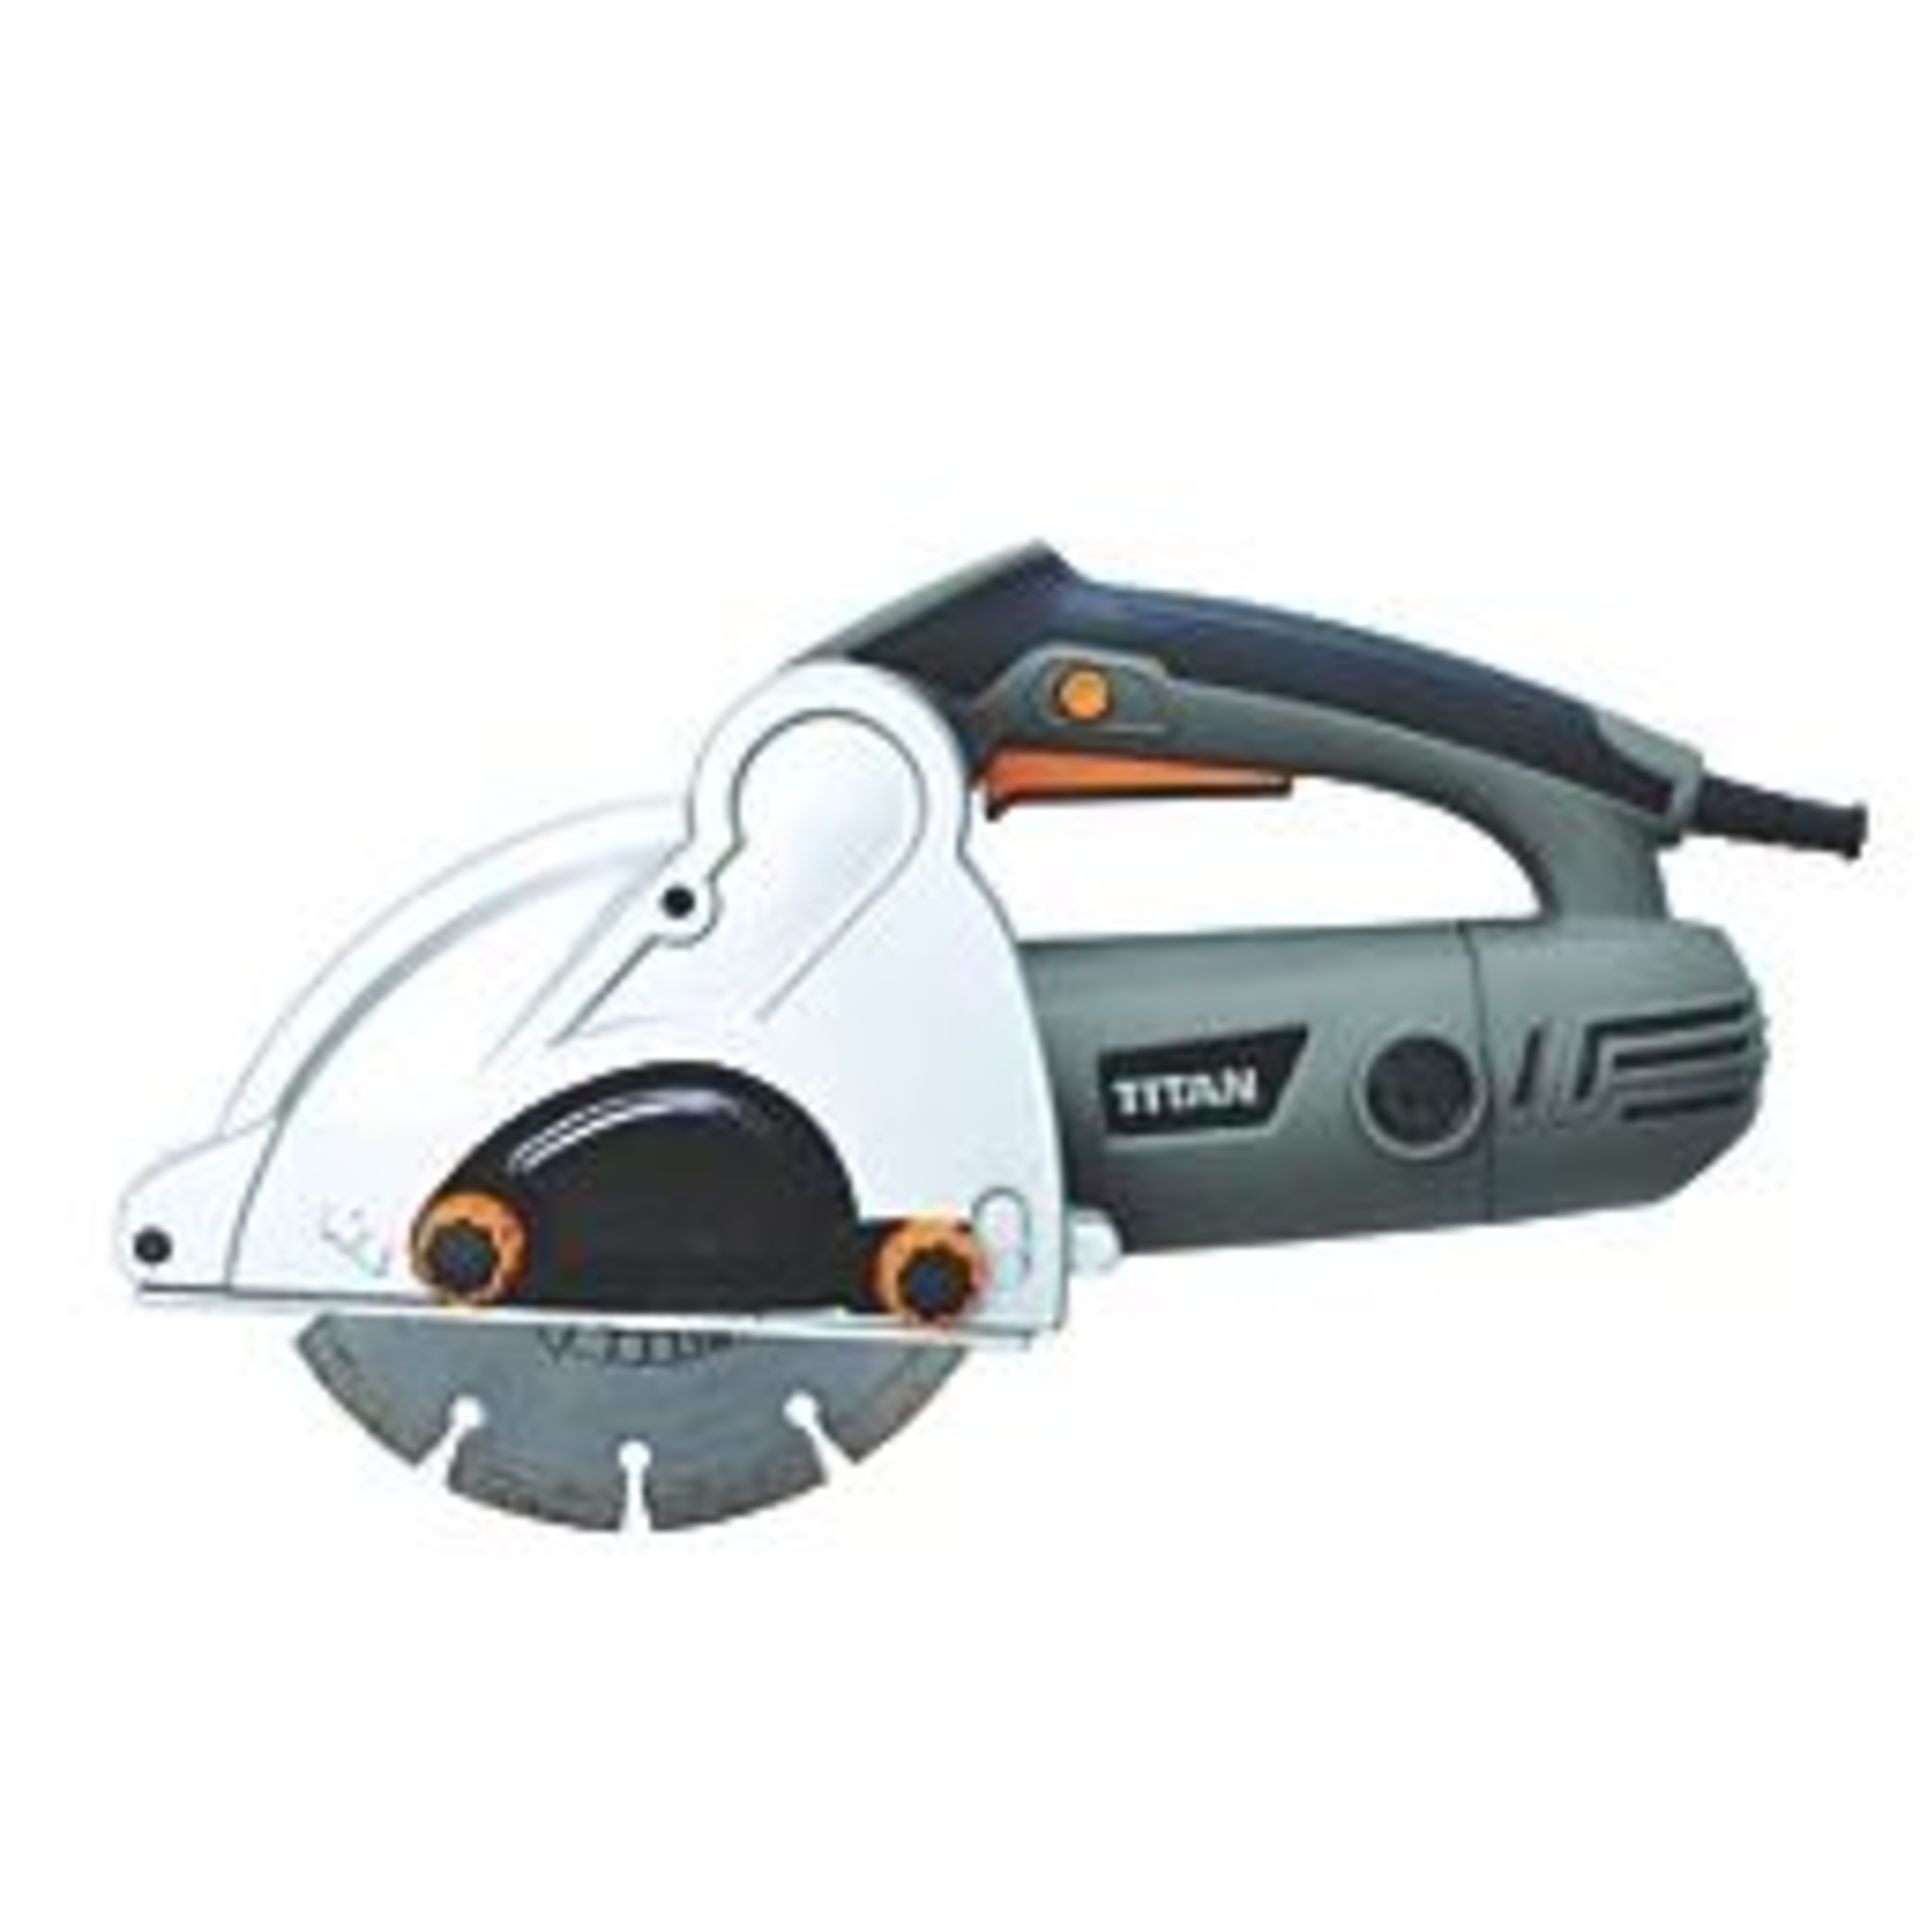 TITAN 150MM 1700W ELECTRIC WALL CHASER 230-240V. - R14.16. Can chisel up and down the wall. Features